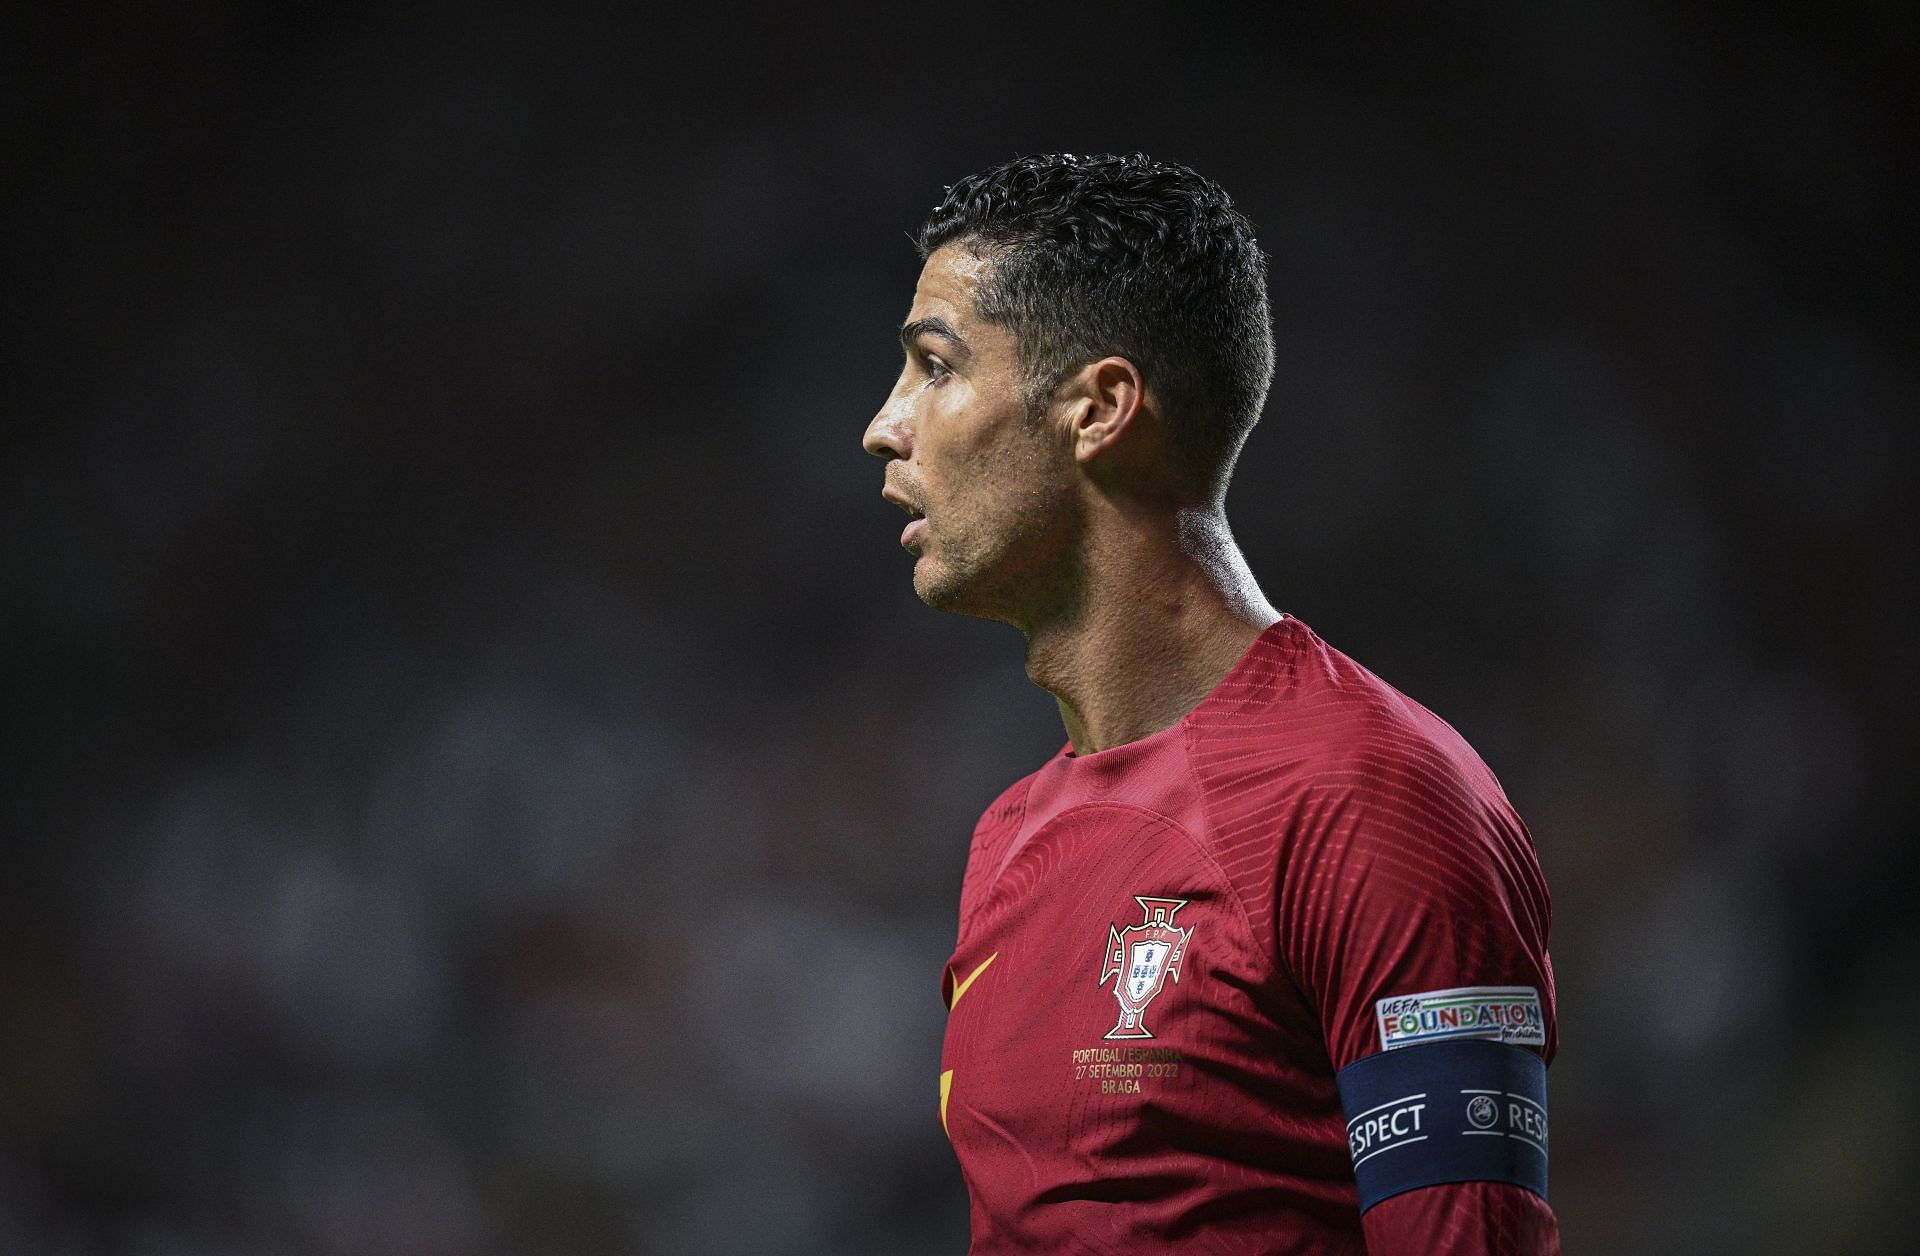 Cristiano Ronaldo attempted to leave Old Trafford this summer in vain.